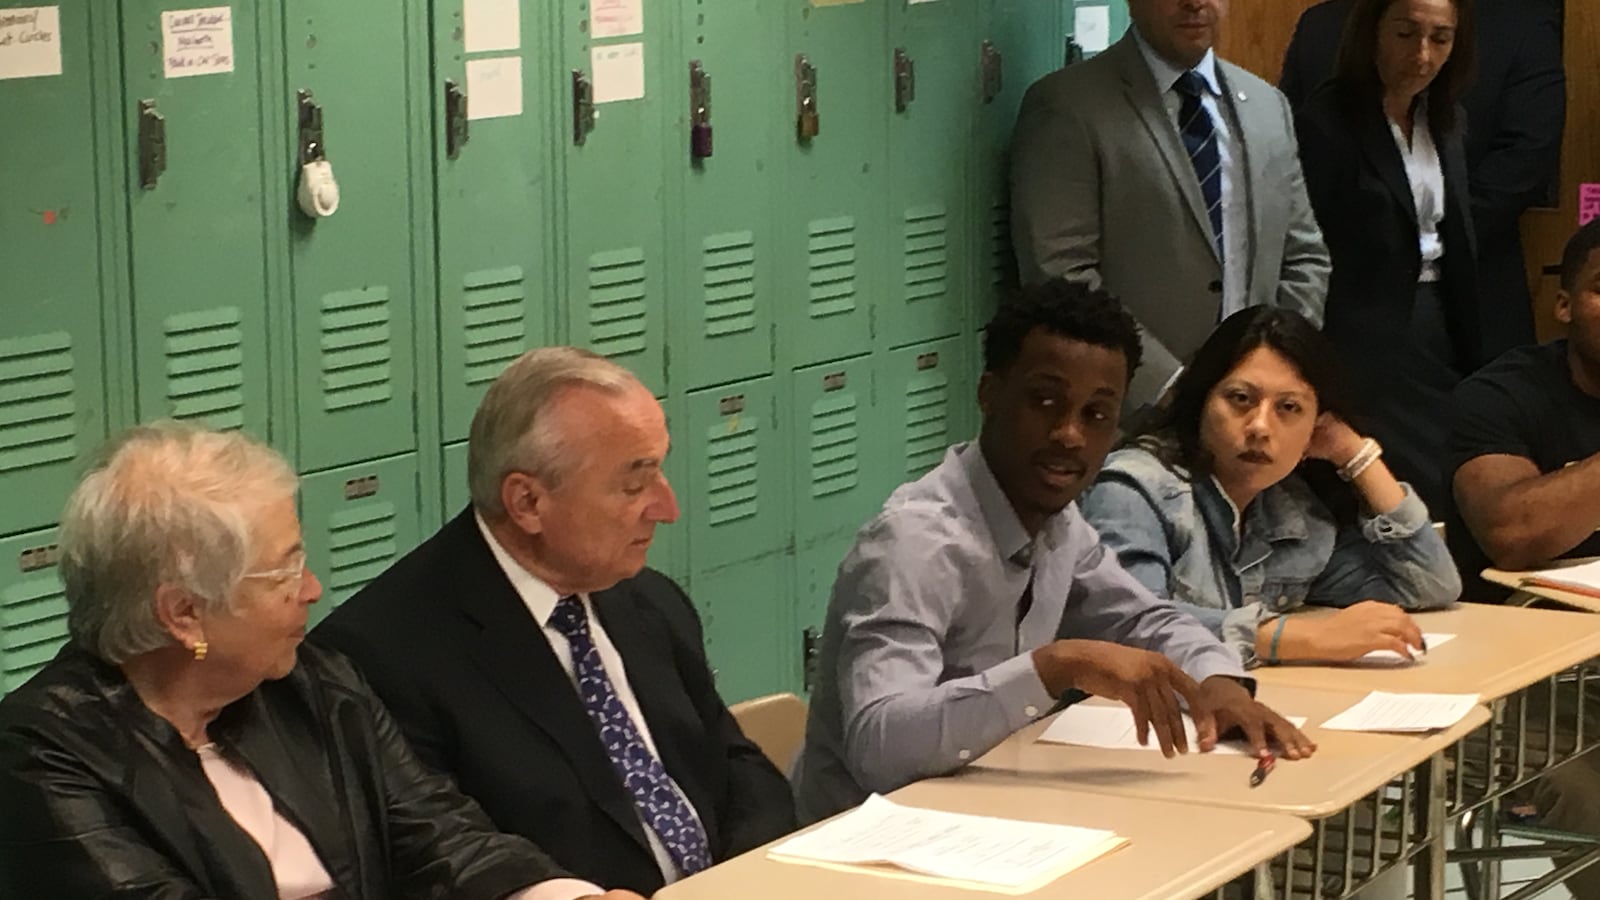 Chancellor Carmen Fariña and NYPD Commissioner William Bratton listen to students talk about restorative justice Thursday at Manhattan's Leadership and Public Service High School